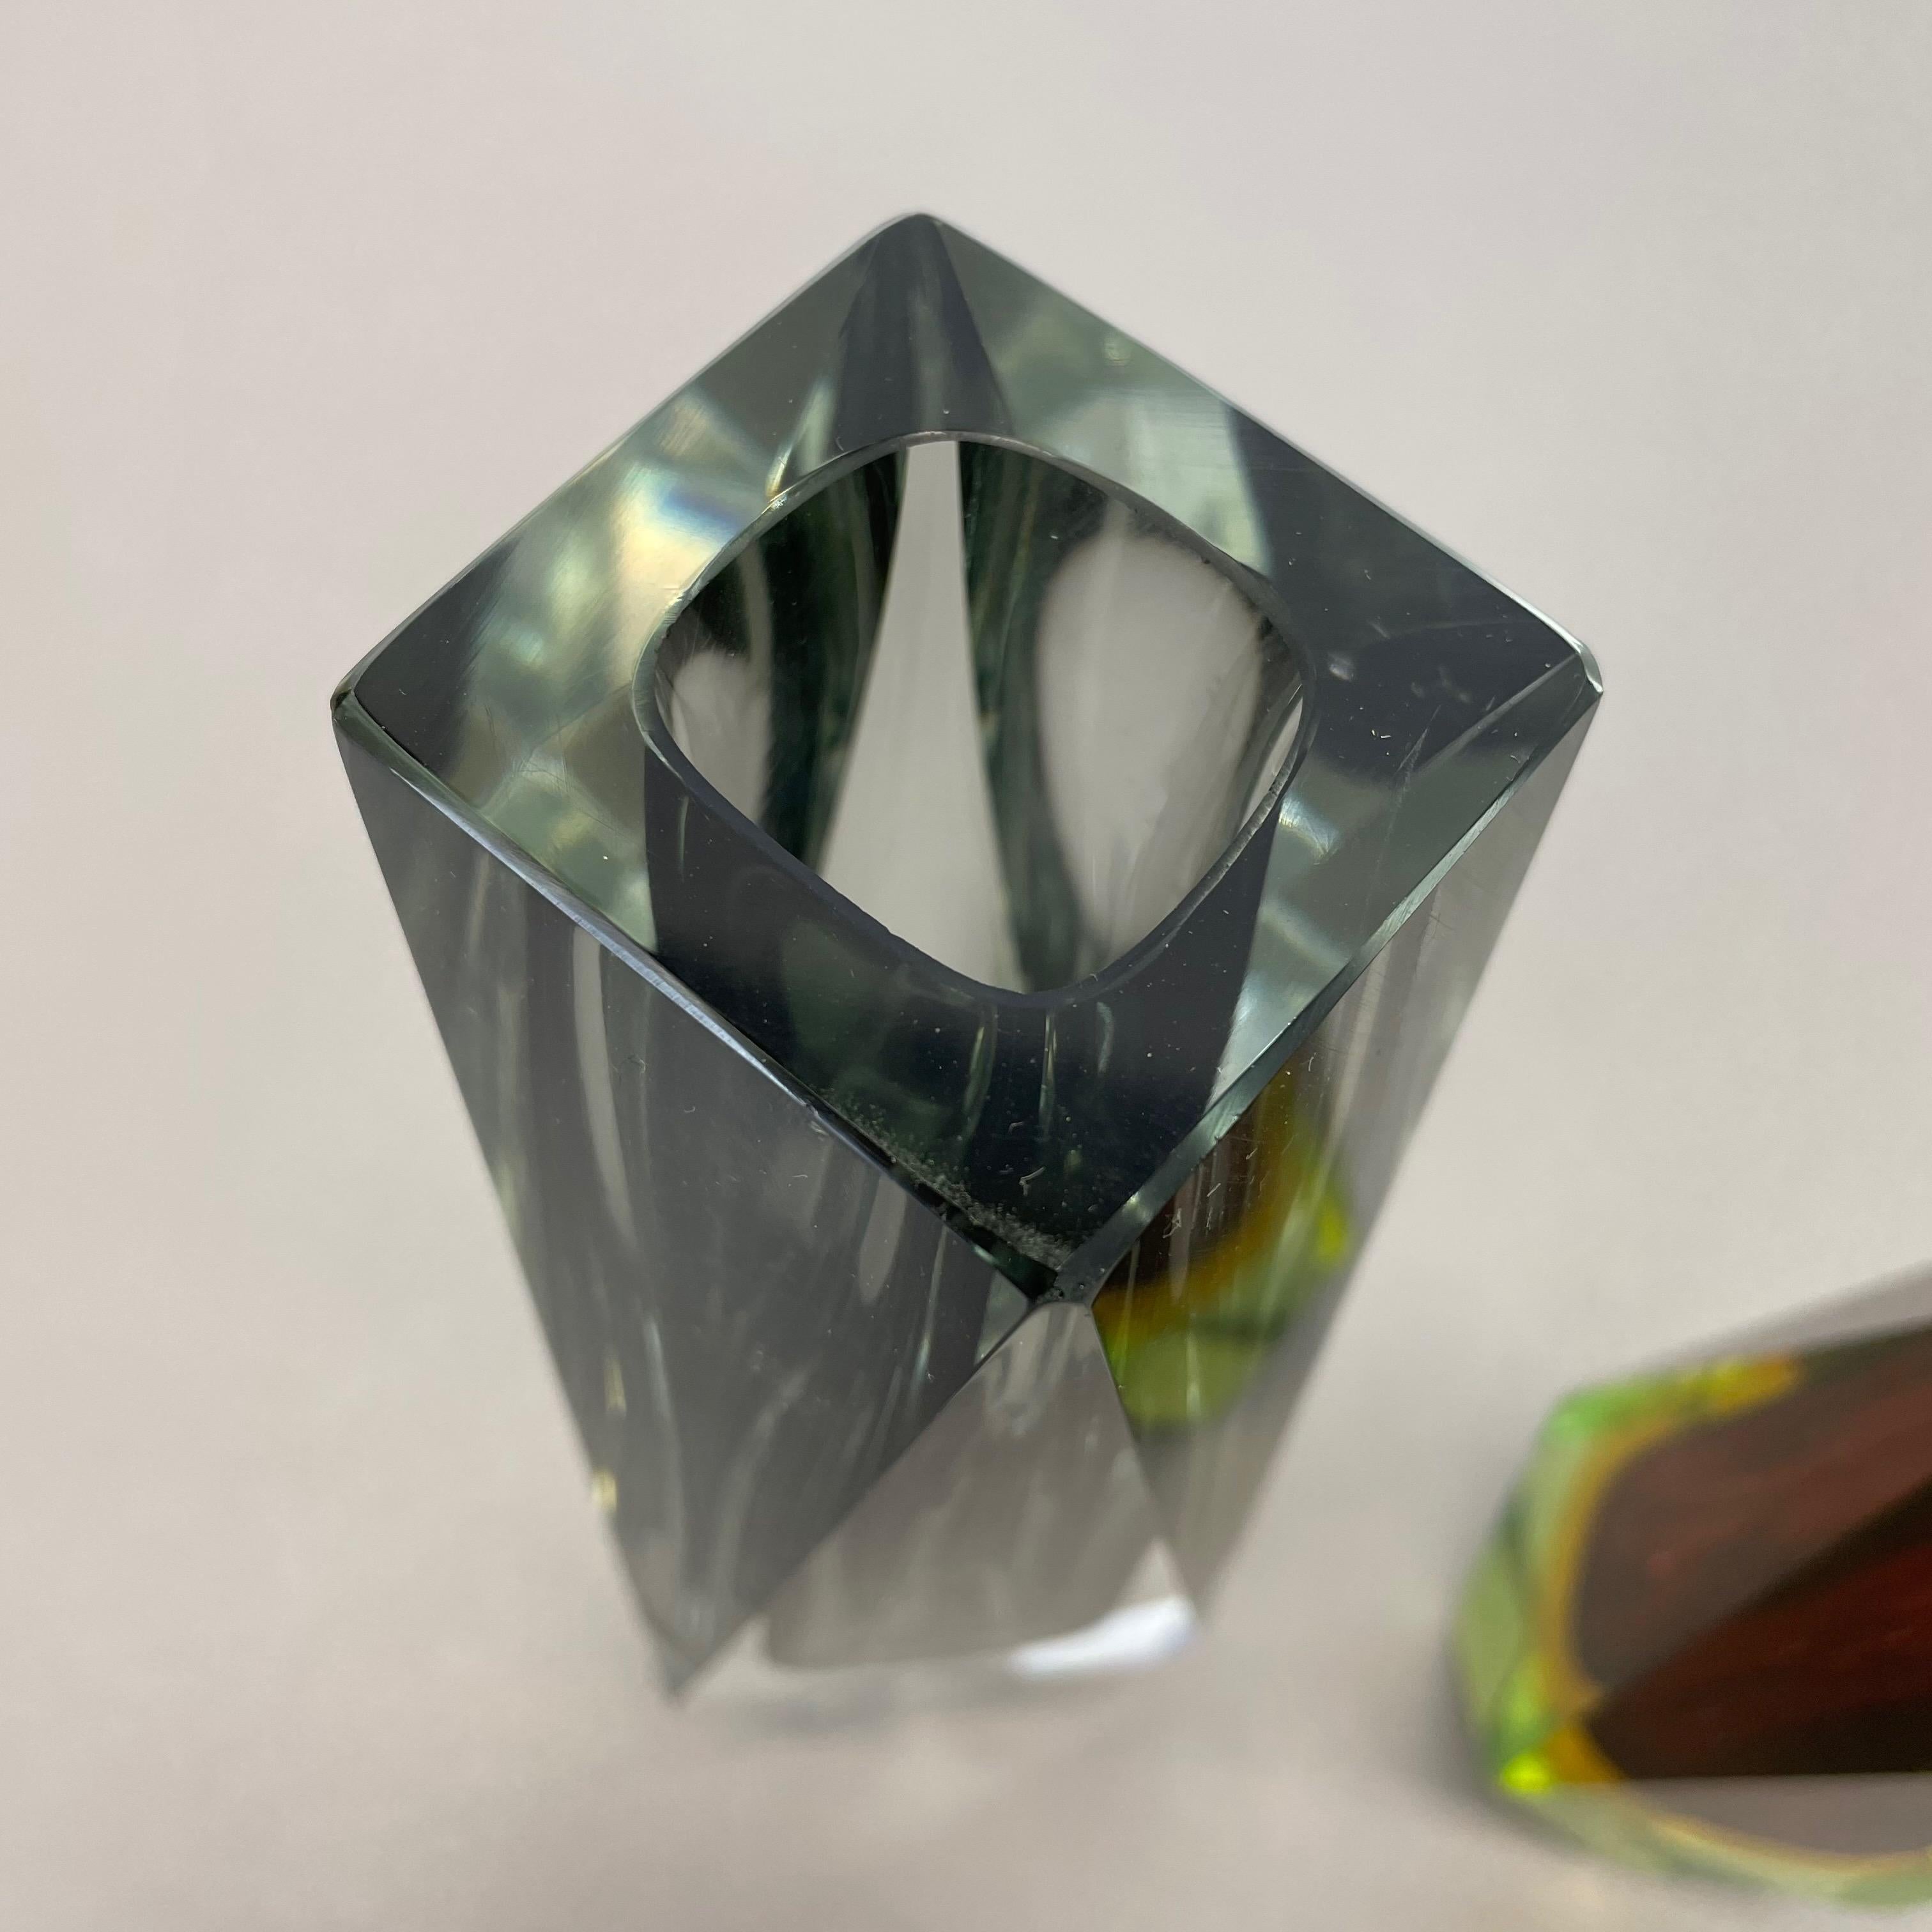 Rare Set of 2 Faceted Murano Glass Sommerso Vases, Italy, 1970s For Sale 7